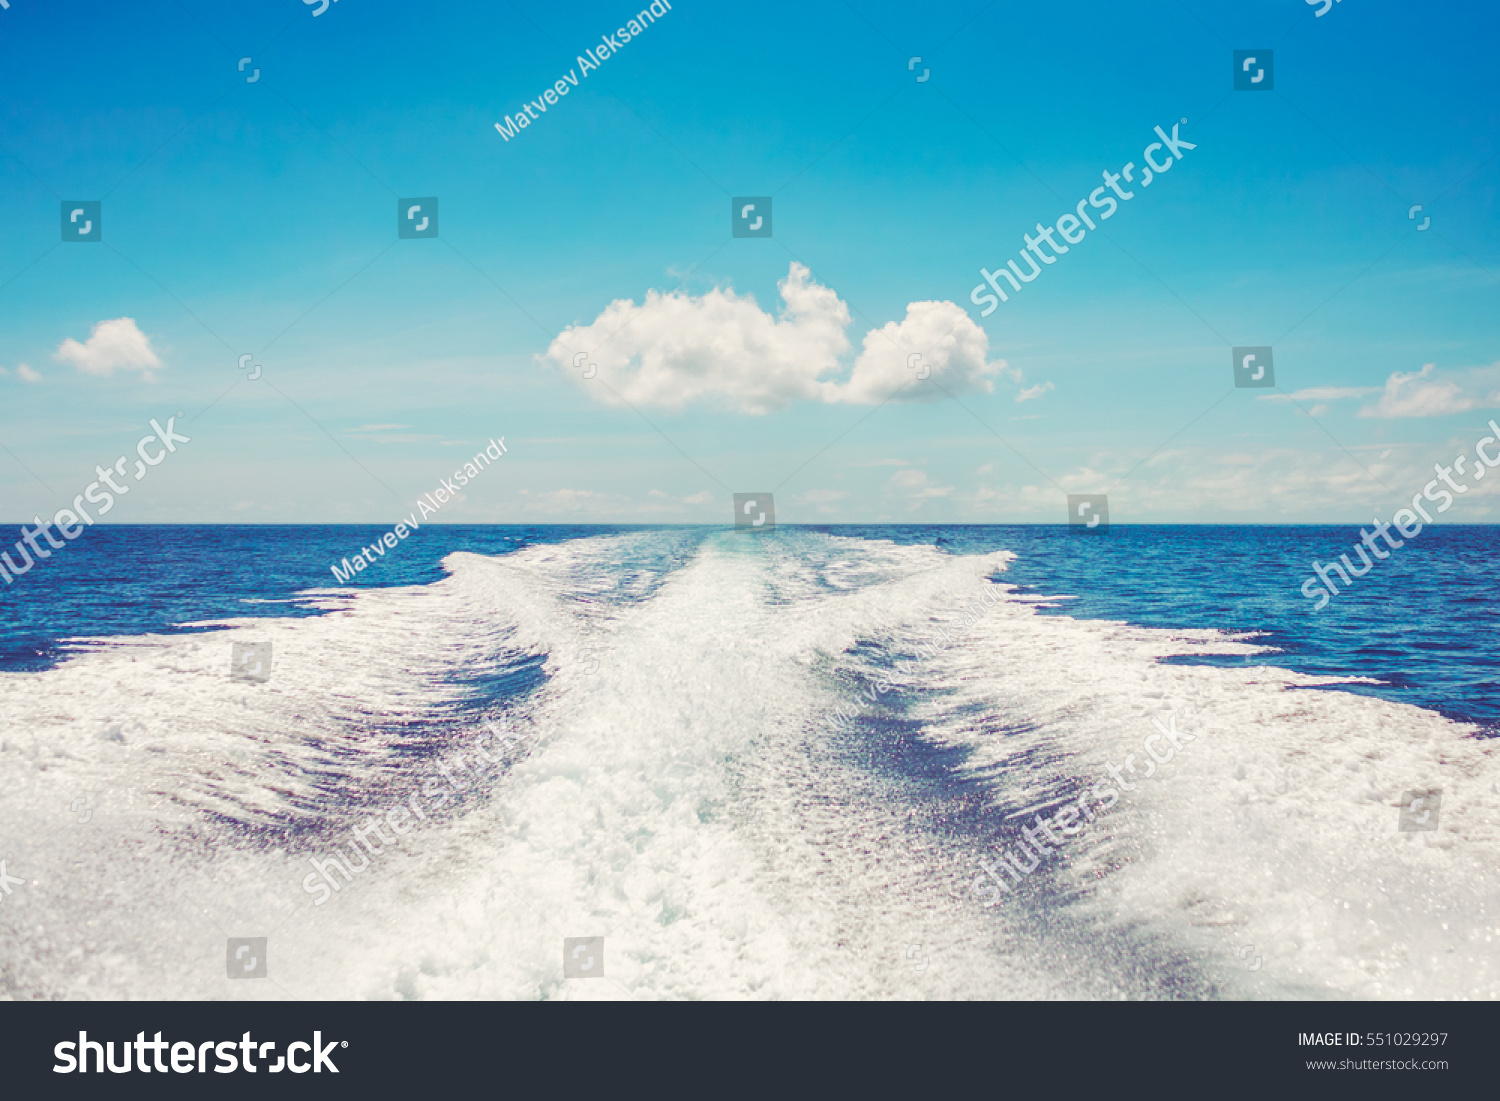 Vacation holiday concept background wallpaper. Background water surface behind of fast moving motor boat in vintage retro style #551029297